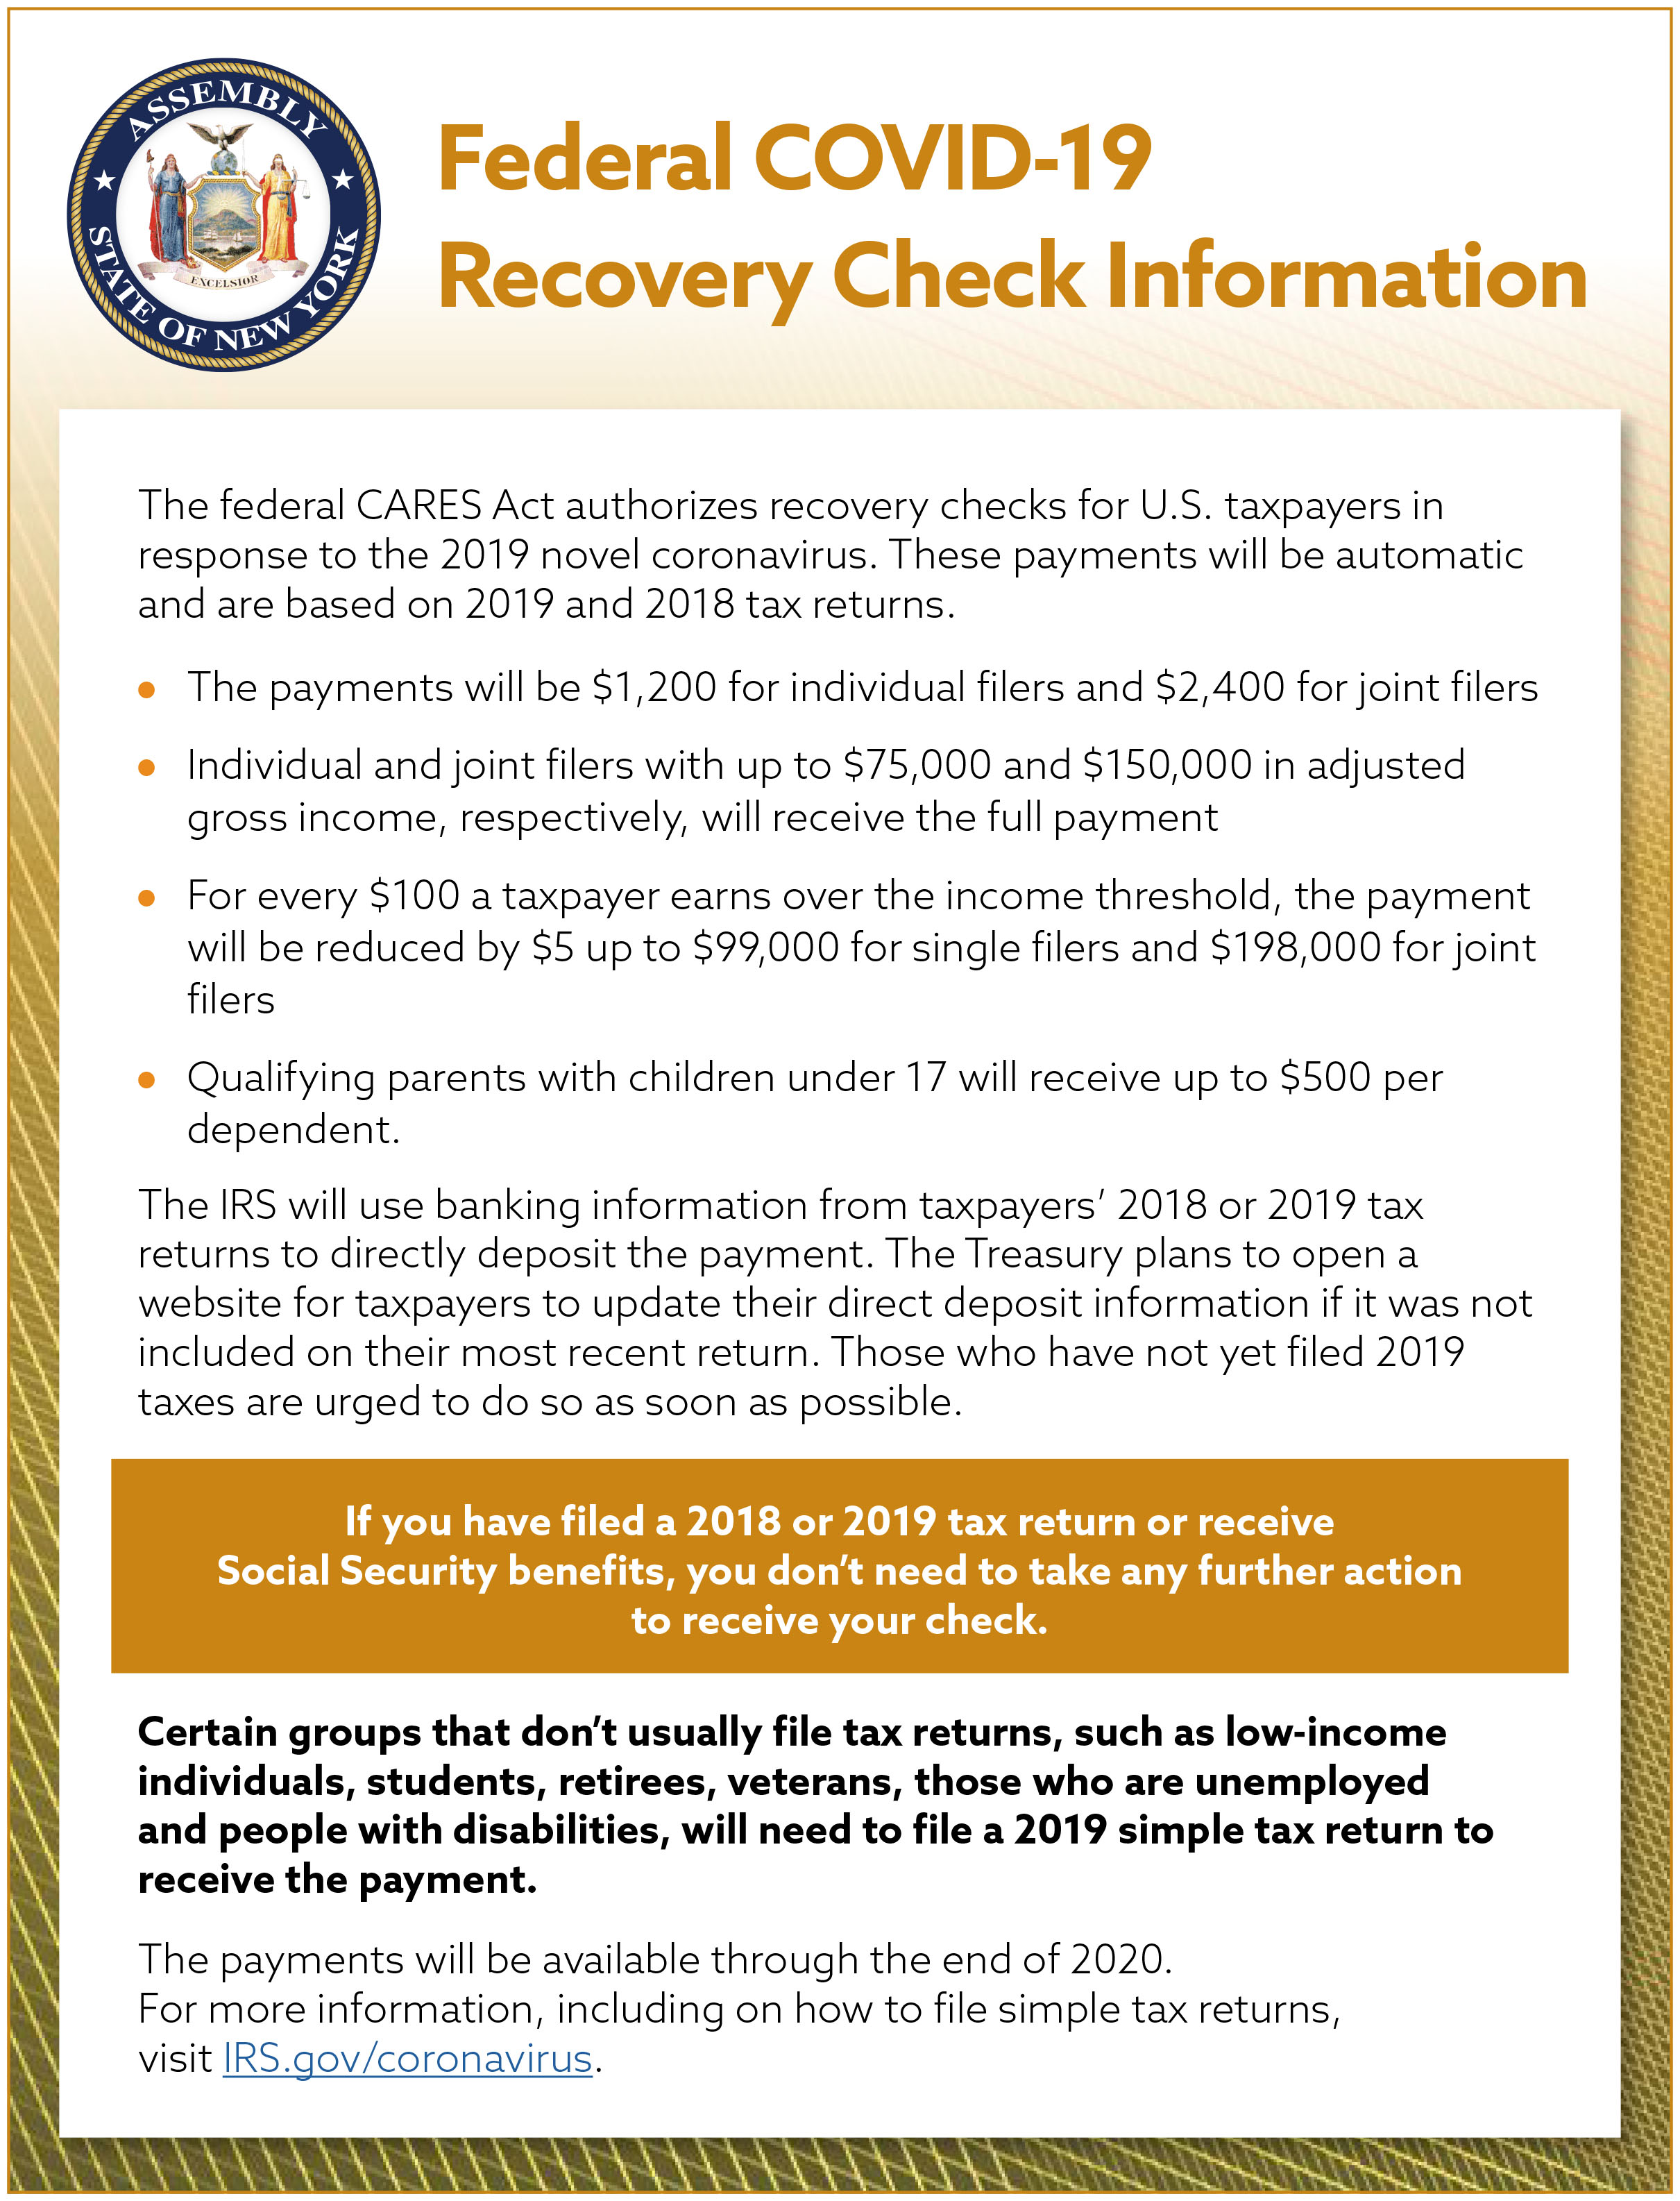 COVID-19 Recovery Check Information